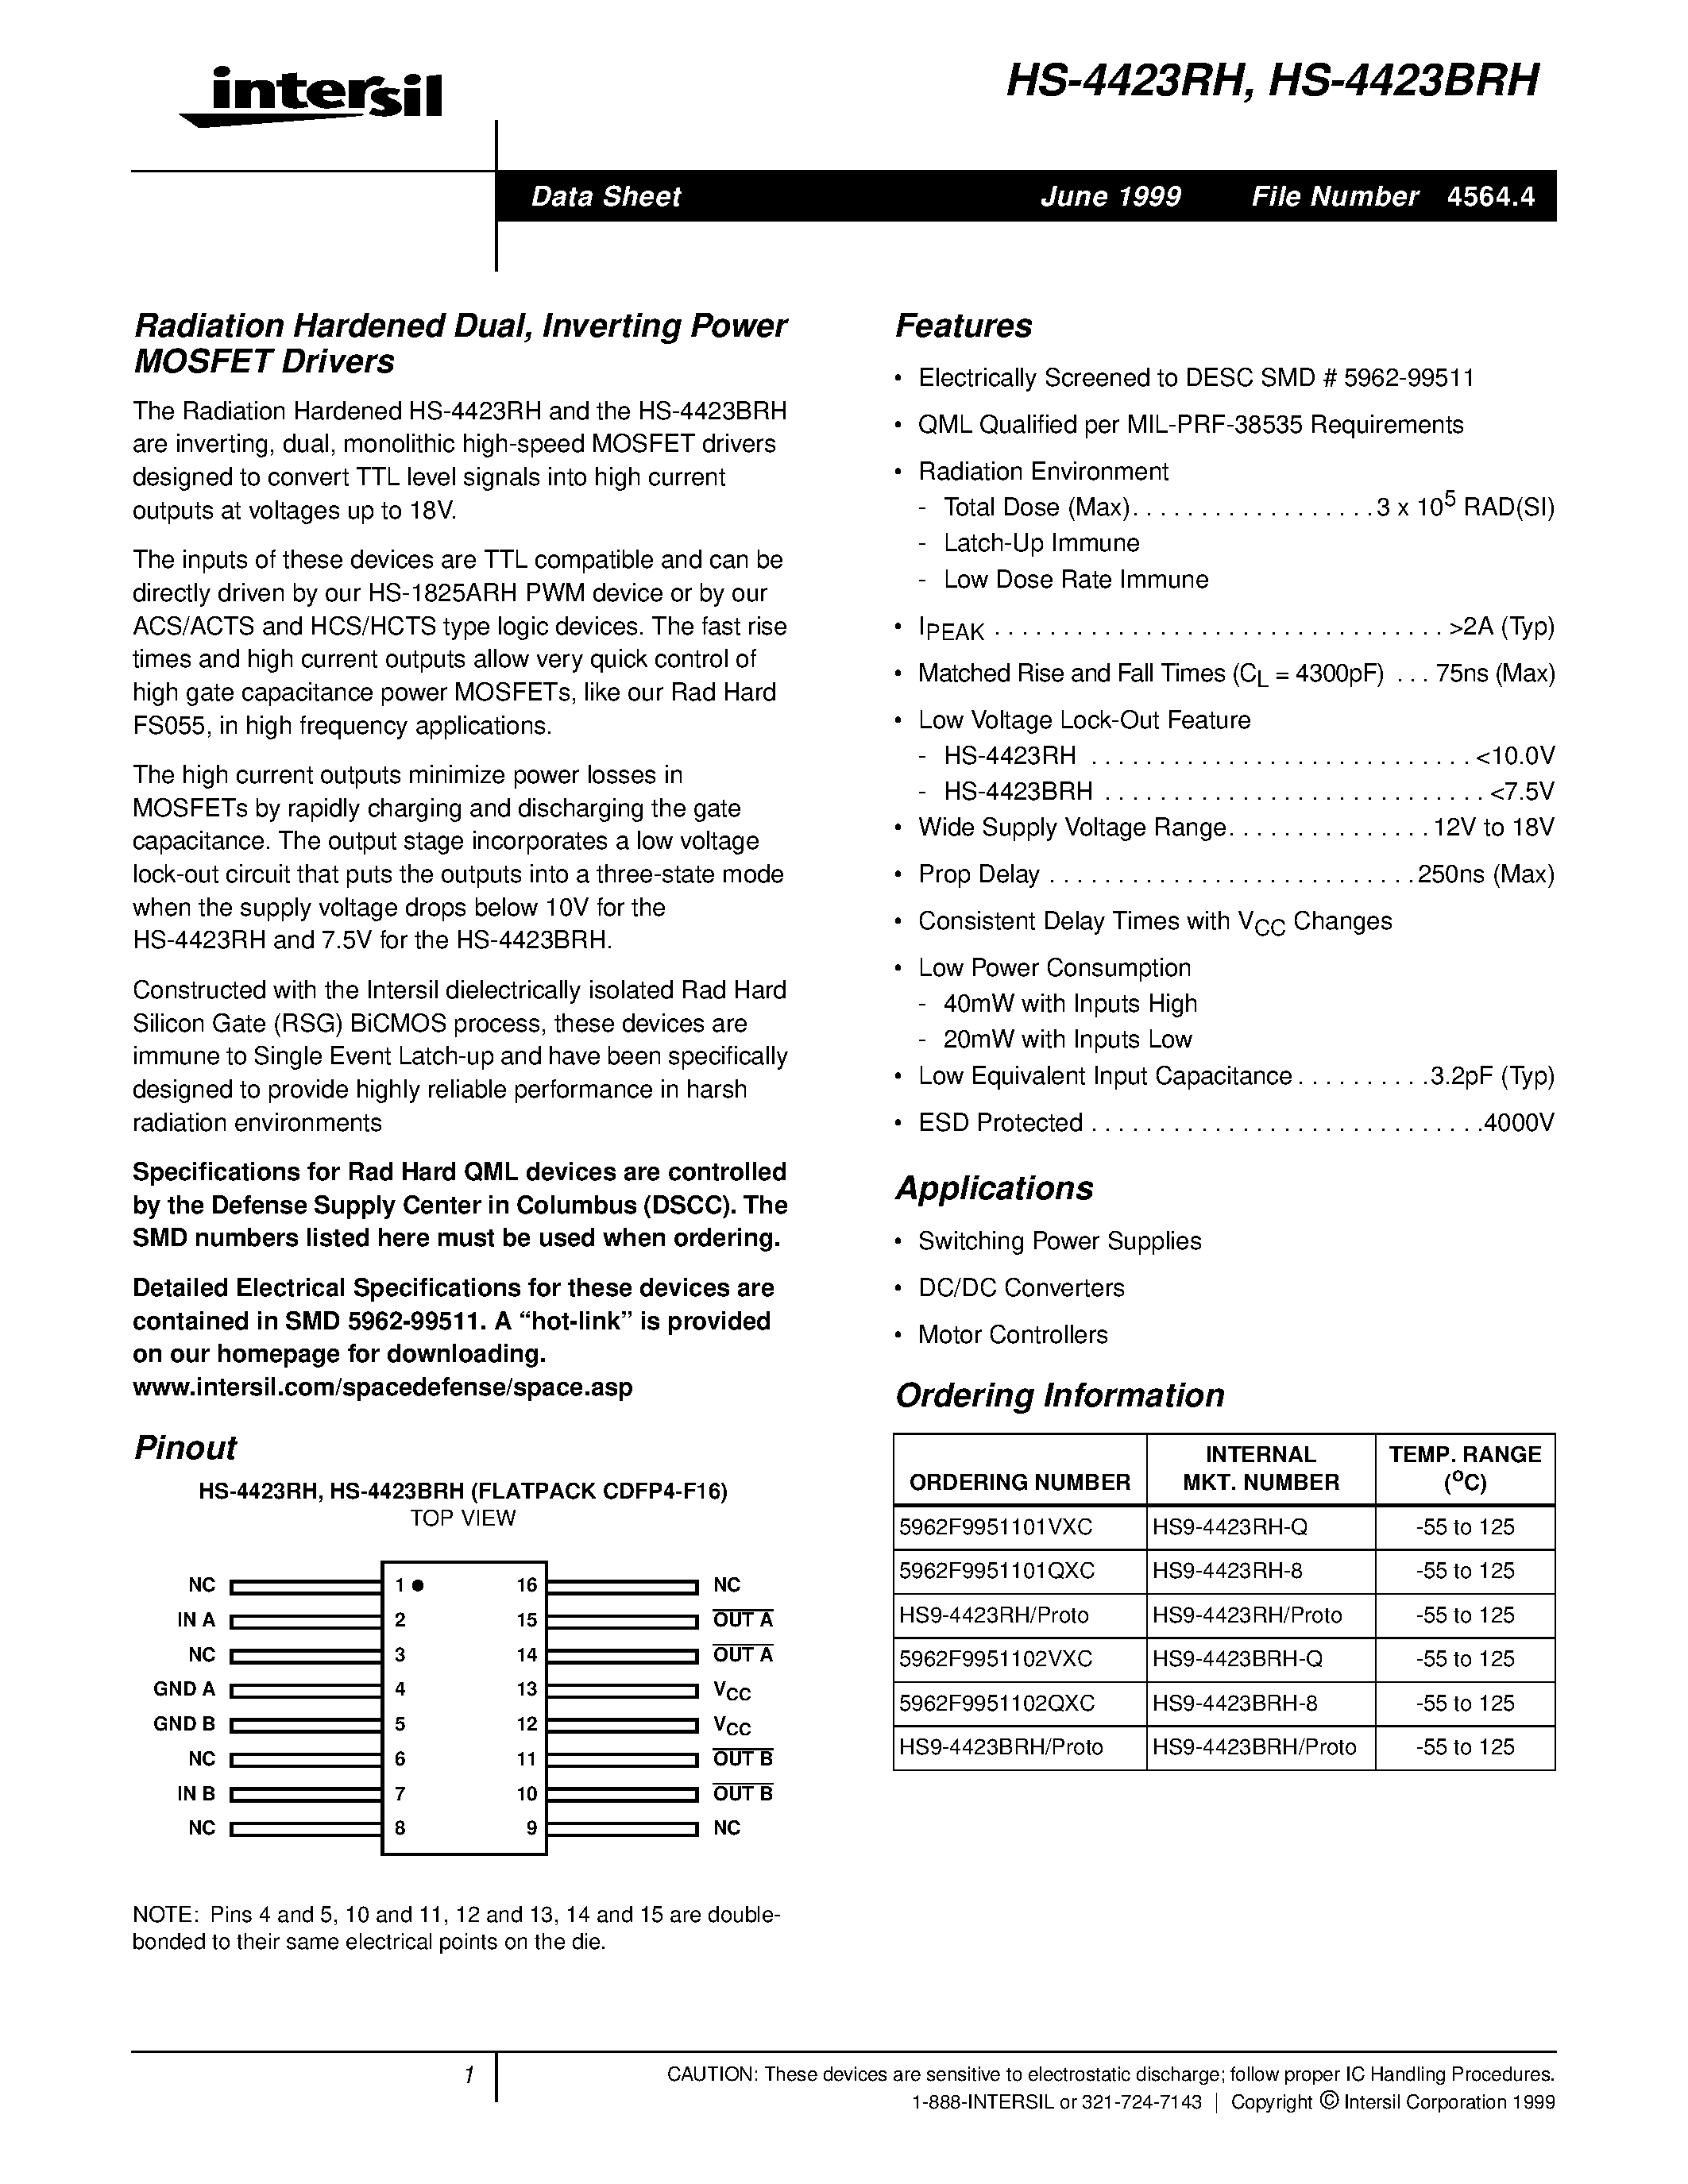 Datasheet HS9-4423RH-Q - Radiation Hardened Dual/ Inverting Power MOSFET Drivers page 1